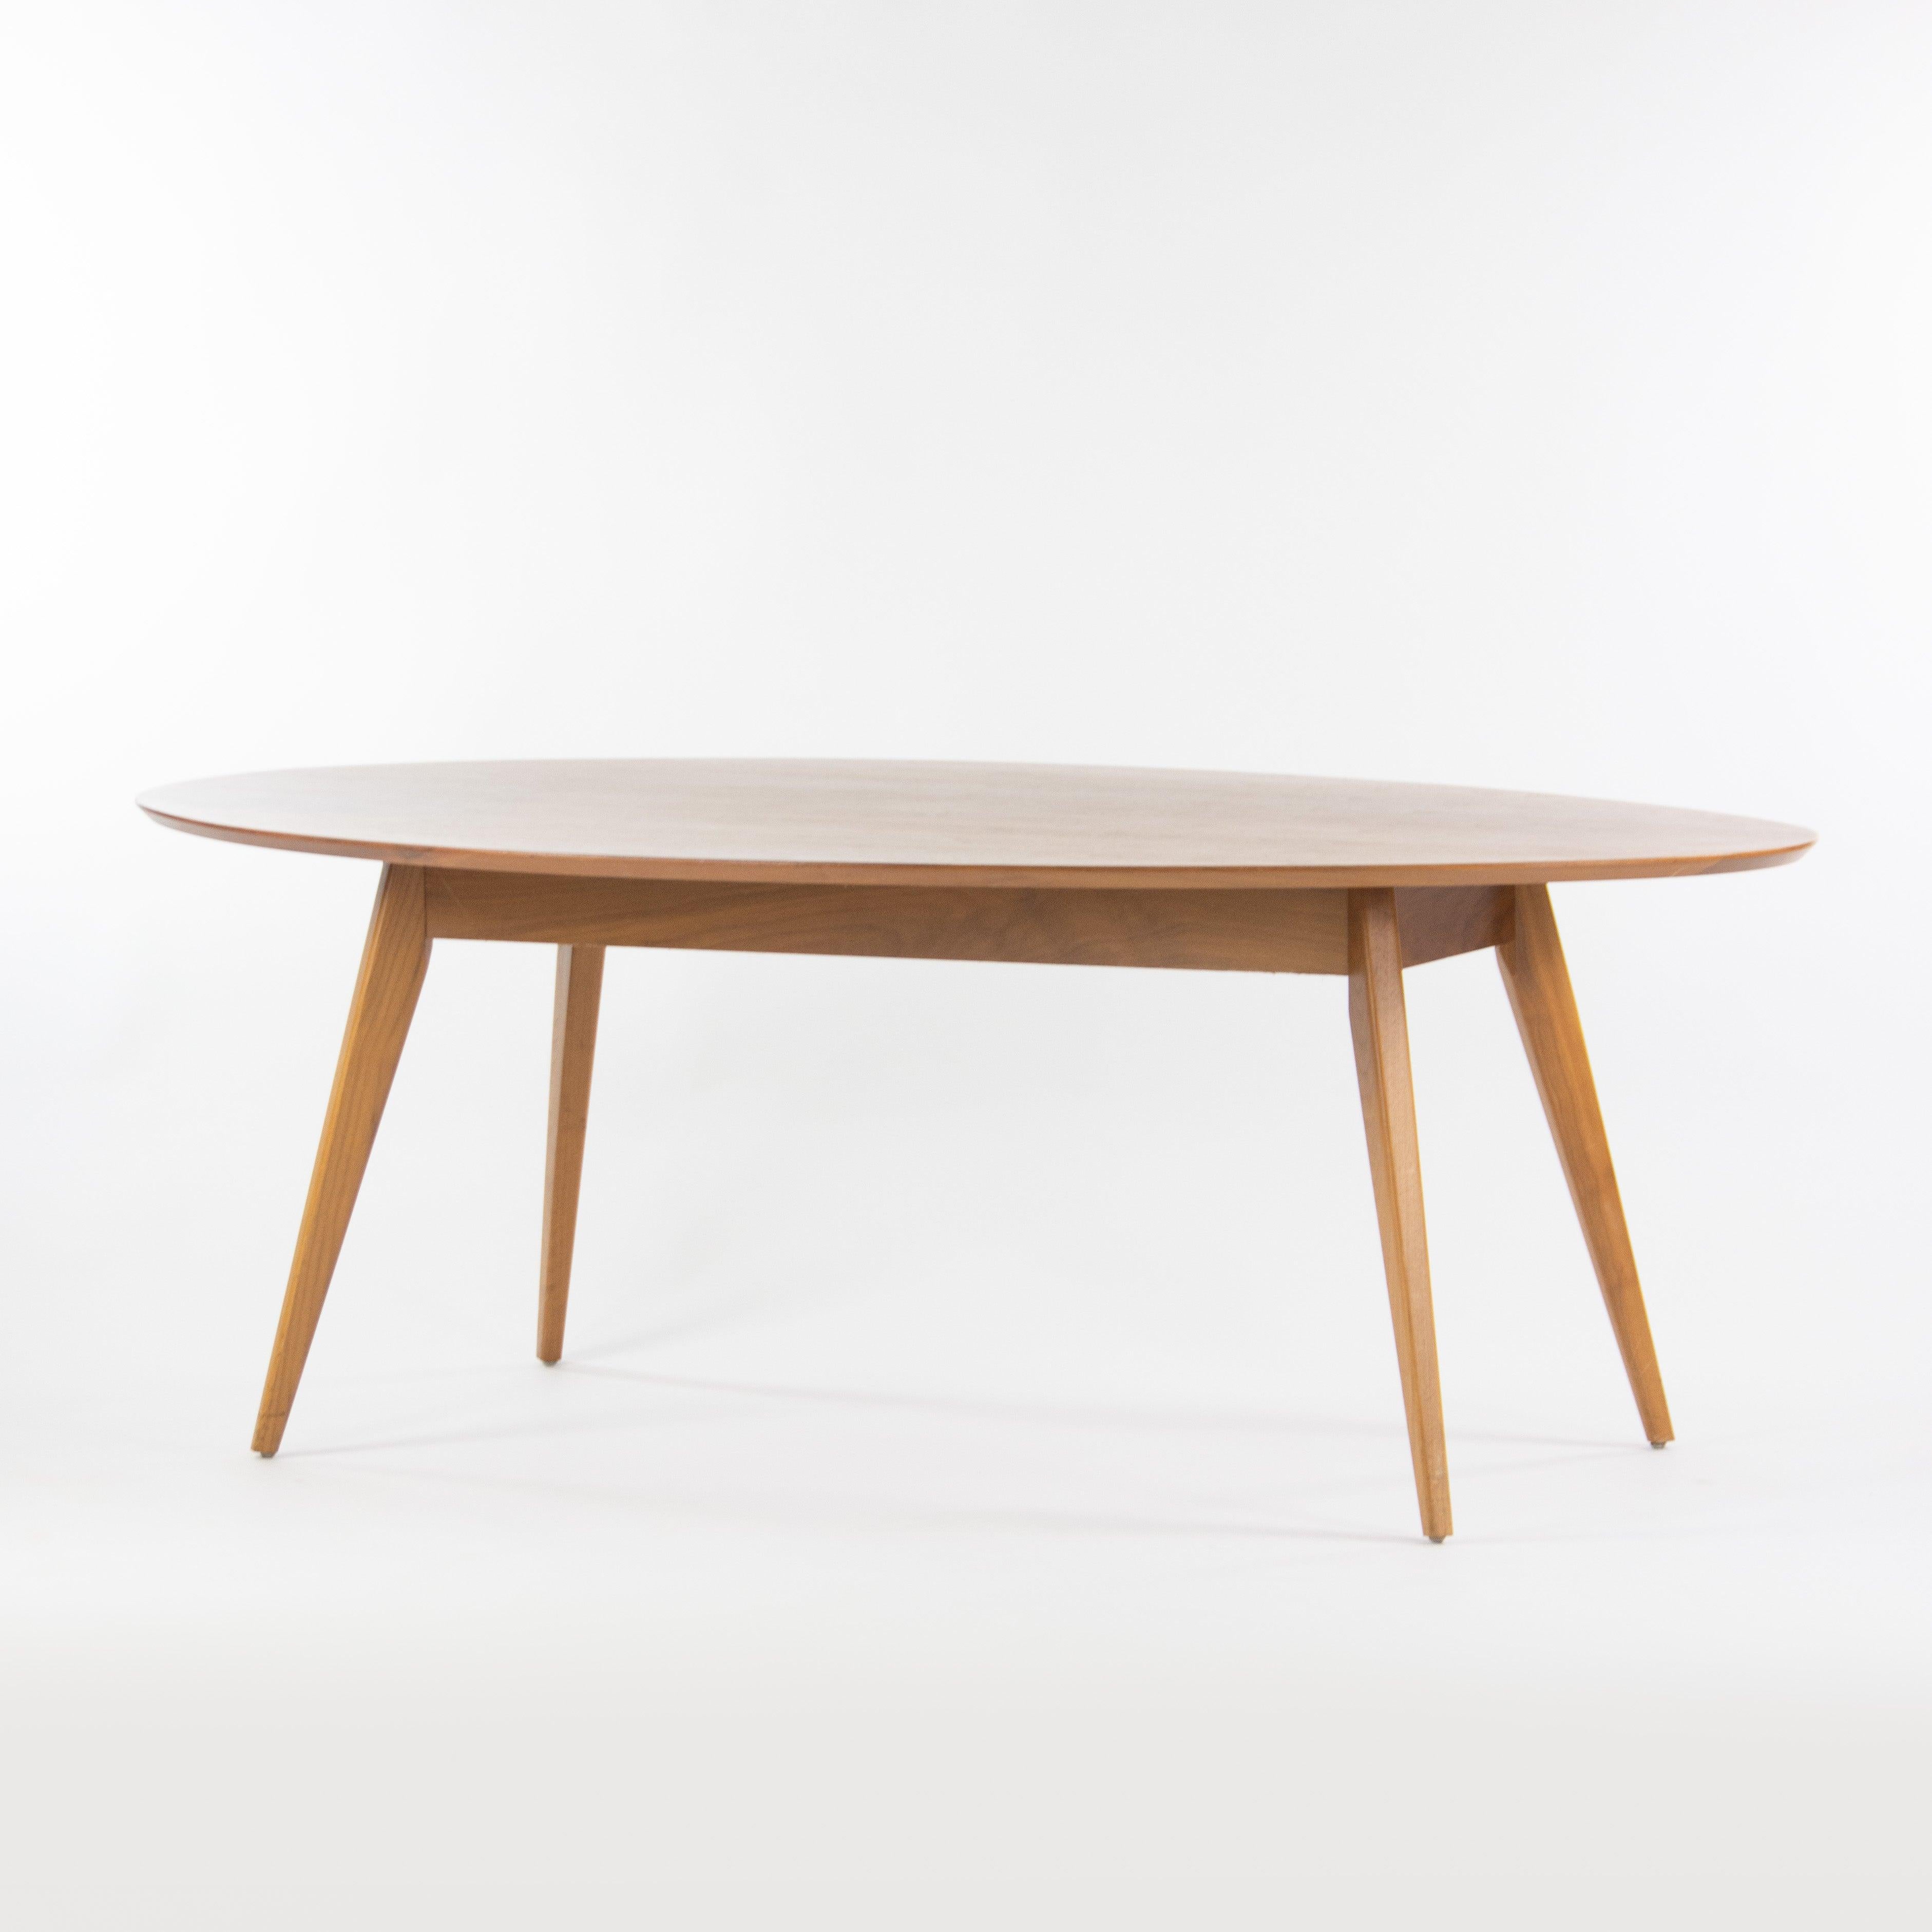 American Custom Jens Risom for Knoll 78x48 inch Oval Walnut Dining / Conference Table For Sale